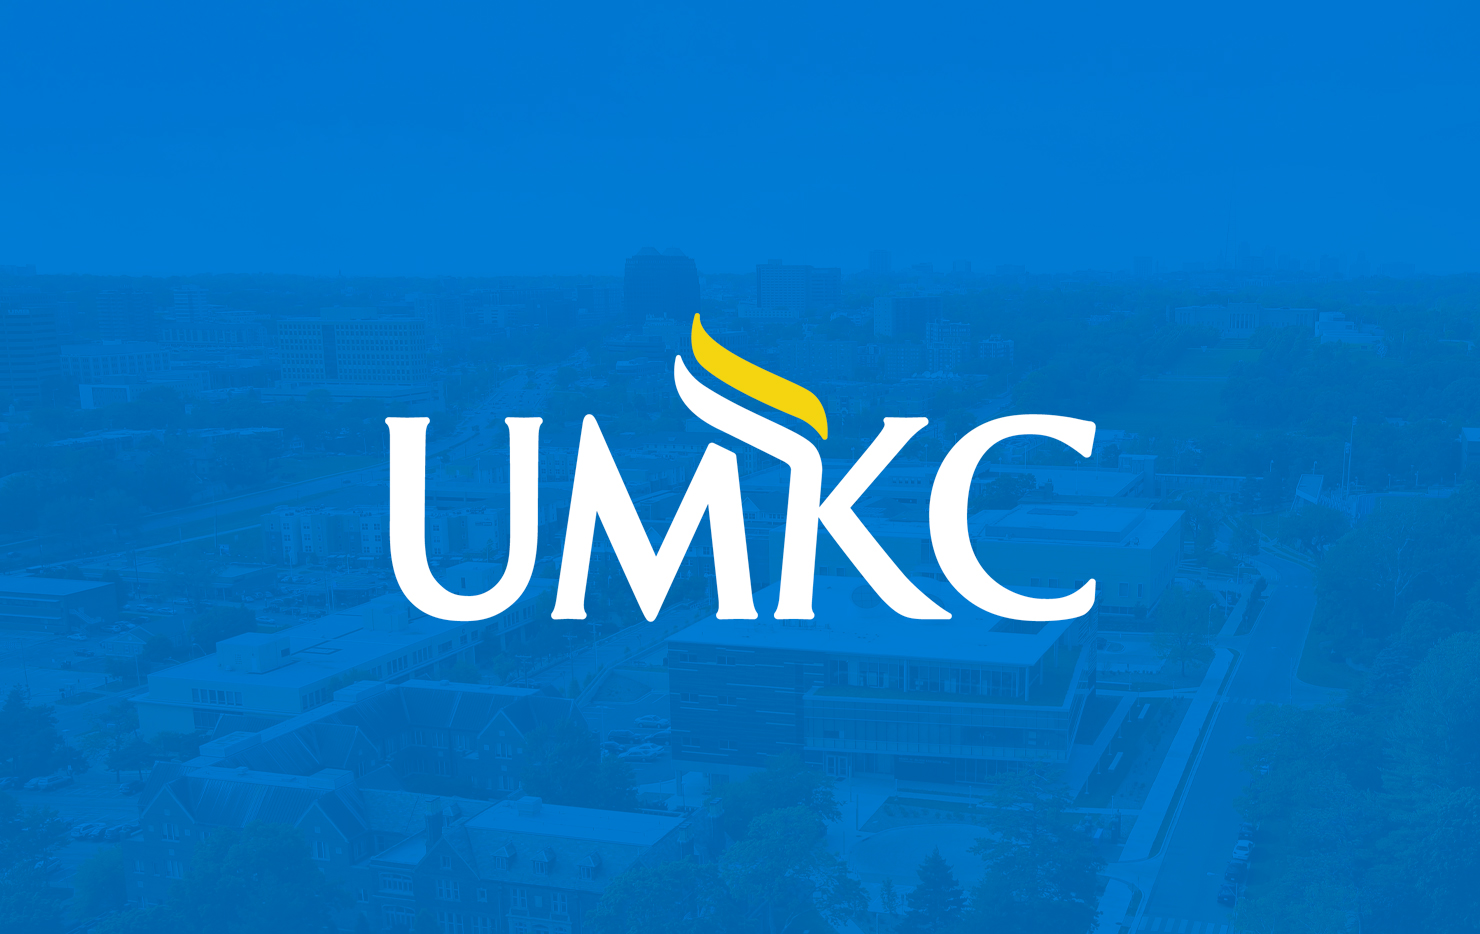 UMKC Coping after a Traumatic Event